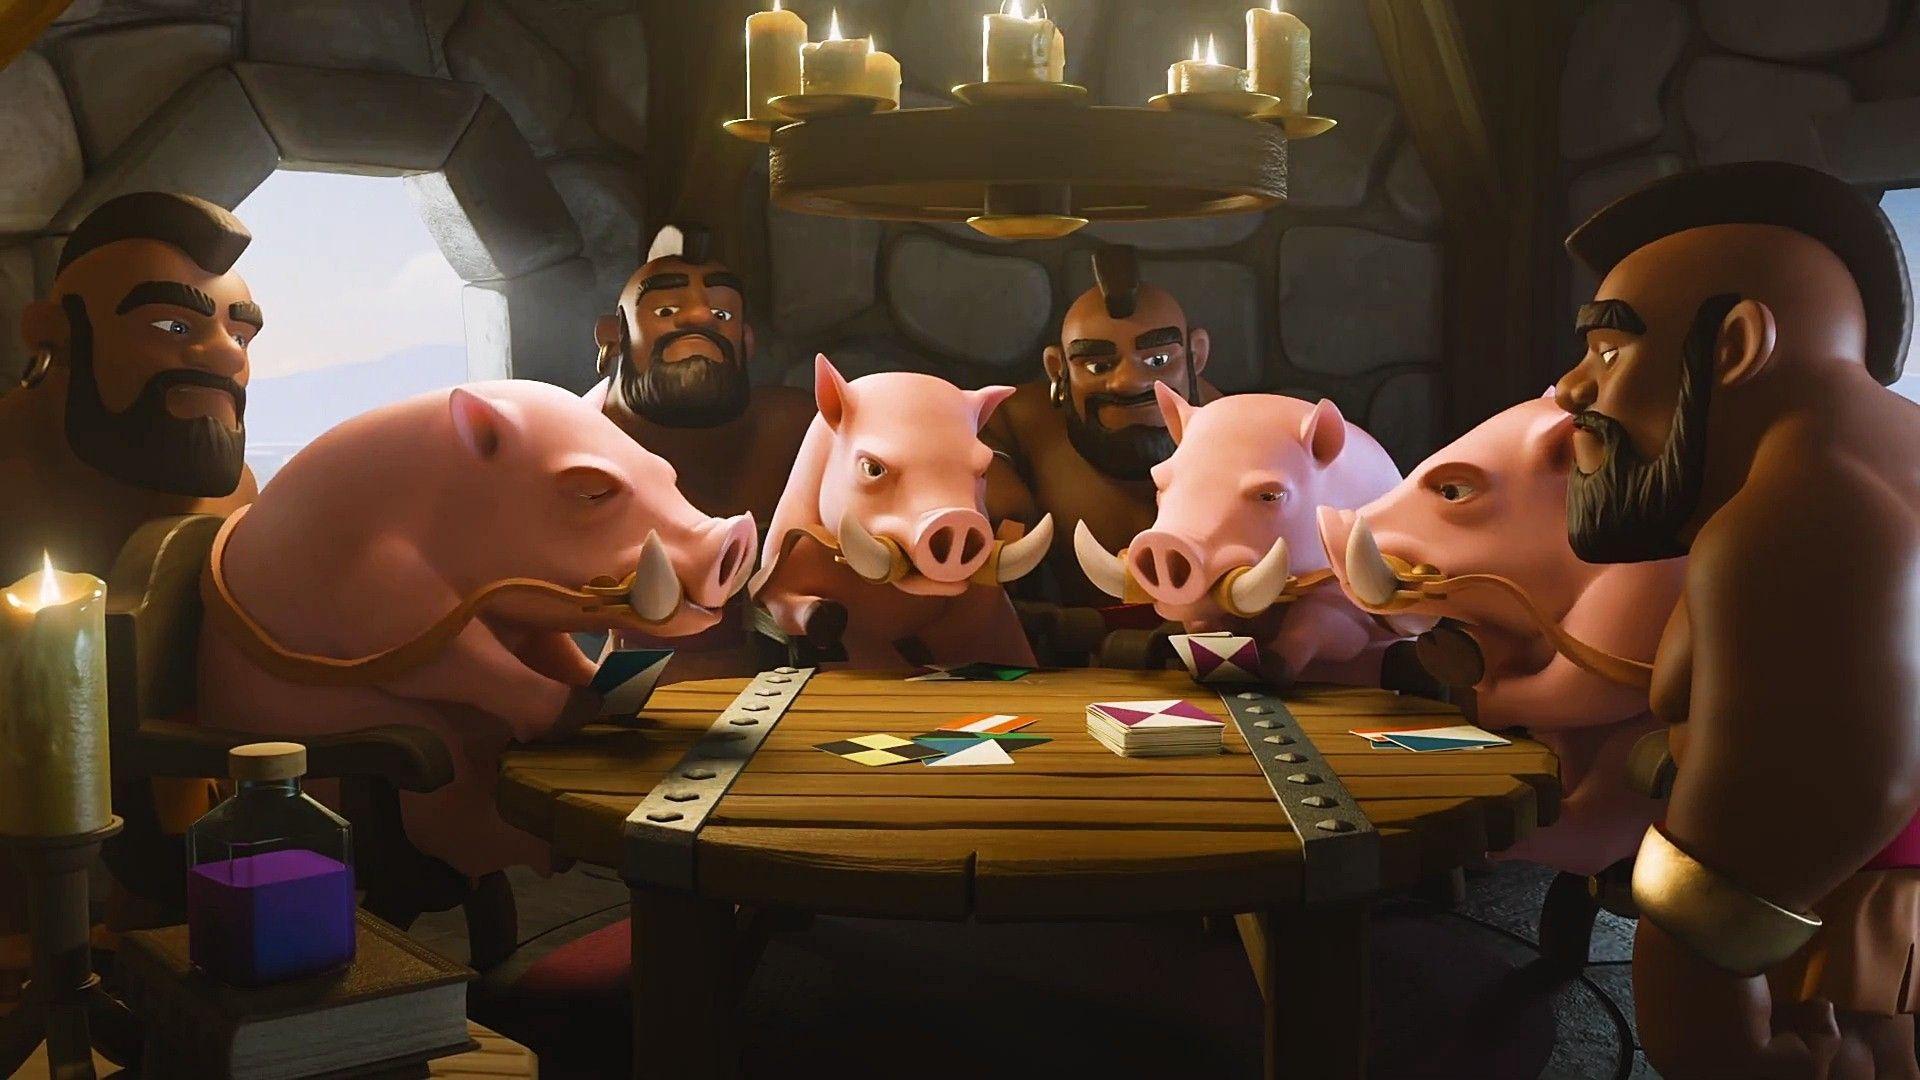 Clash of Clans Ride of The Hog Riders 2016 Wallpapers 00660.